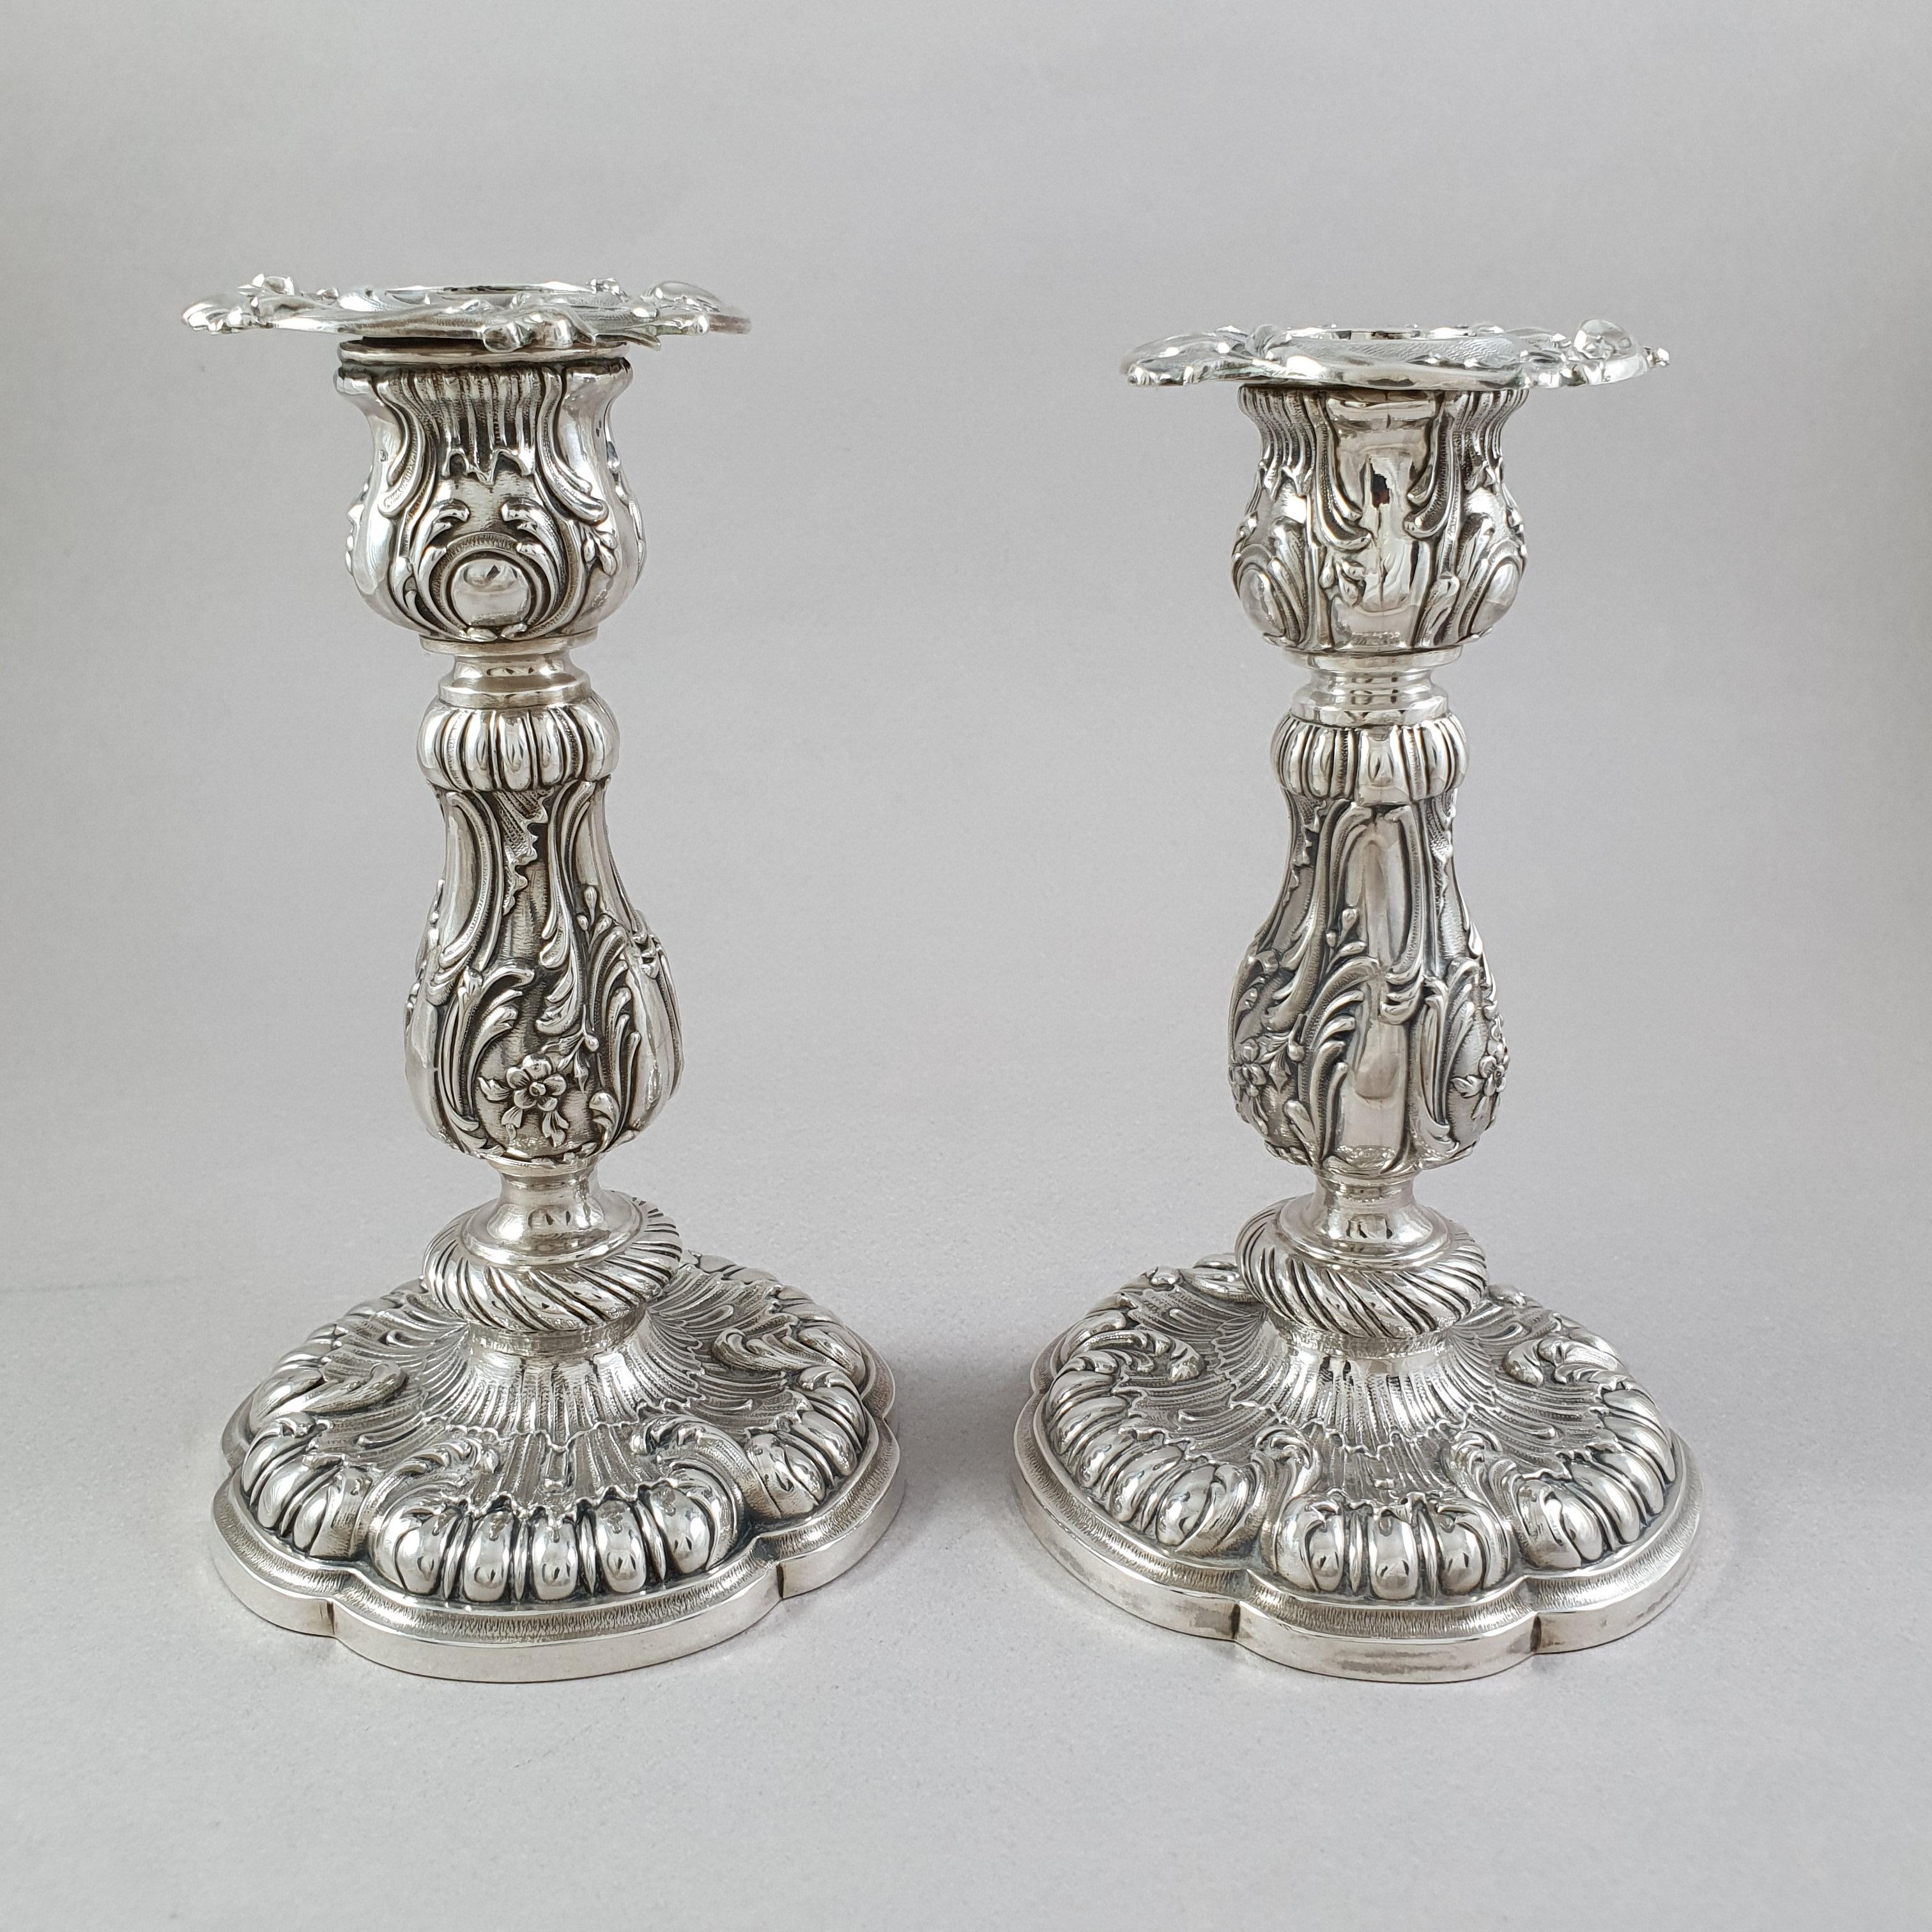 Pair of French Sterling Silver candlesticks from the 19th century 

Decorated with gadroons, rocailles patterns, foliage and flowers. 

French Sterling silver hallmark boar head 
Silversmith: Léon Gariod 
Height: 13.5 cm 
Weight: 445